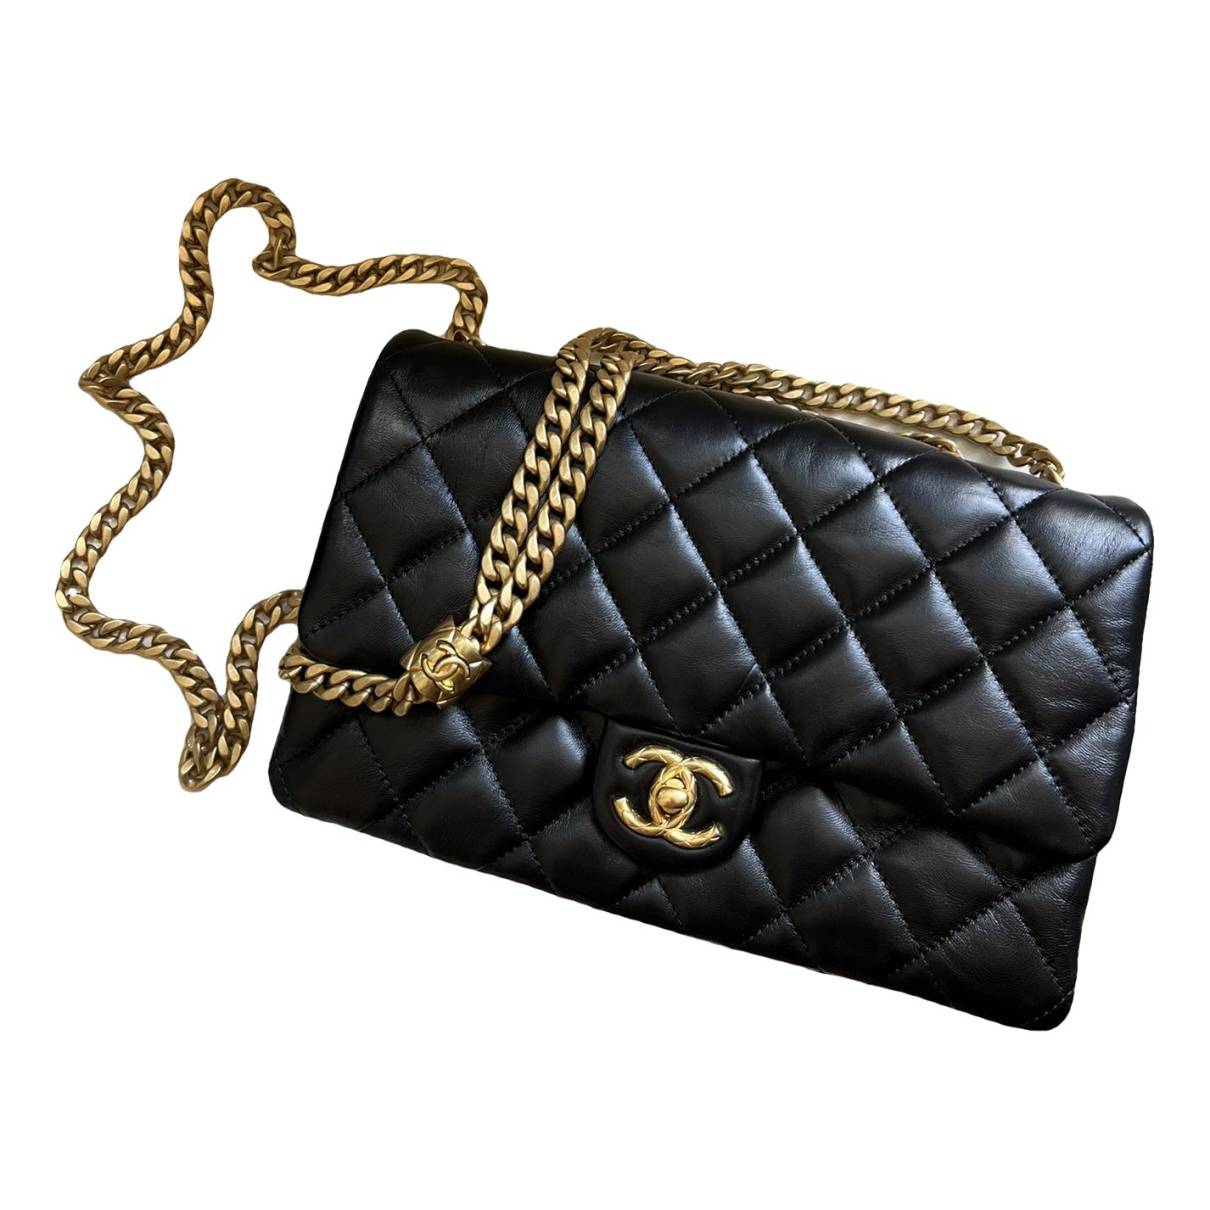 Timeless/classique leather crossbody bag Chanel Black in Leather - 35479793